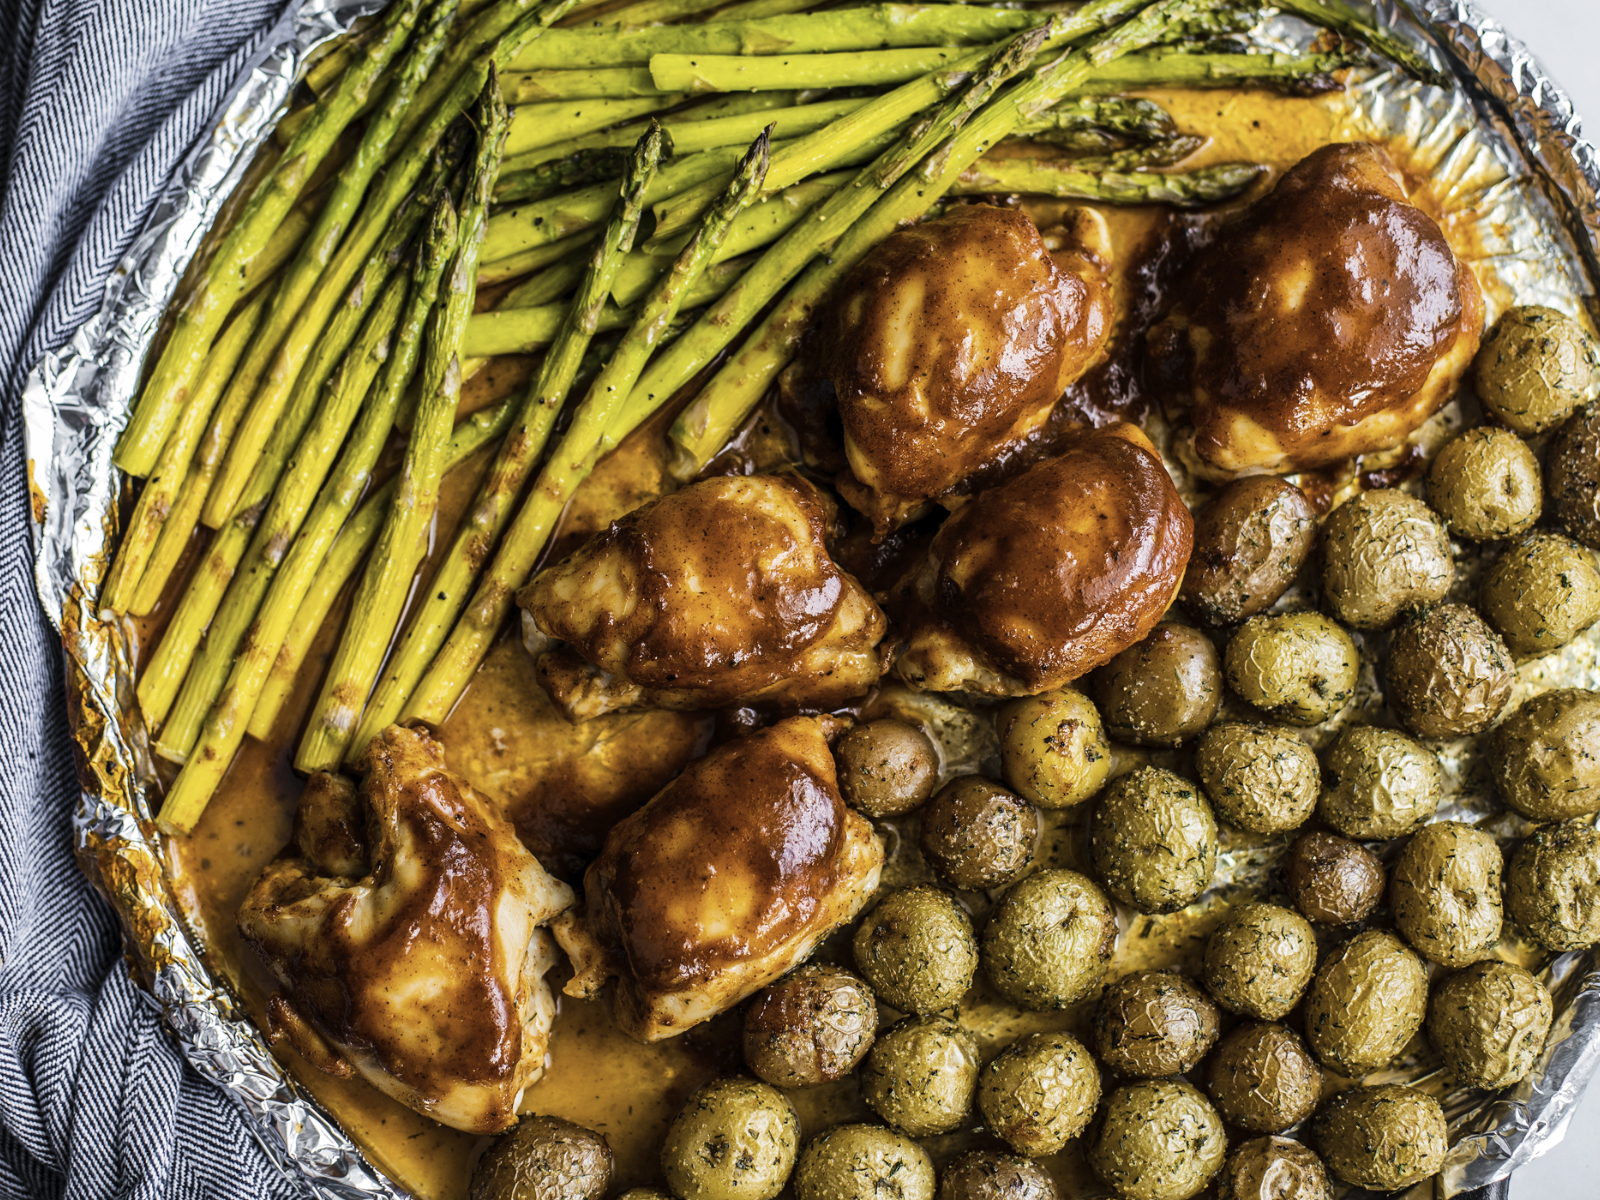 BBQ chicken with roasted asparagus and potatoes